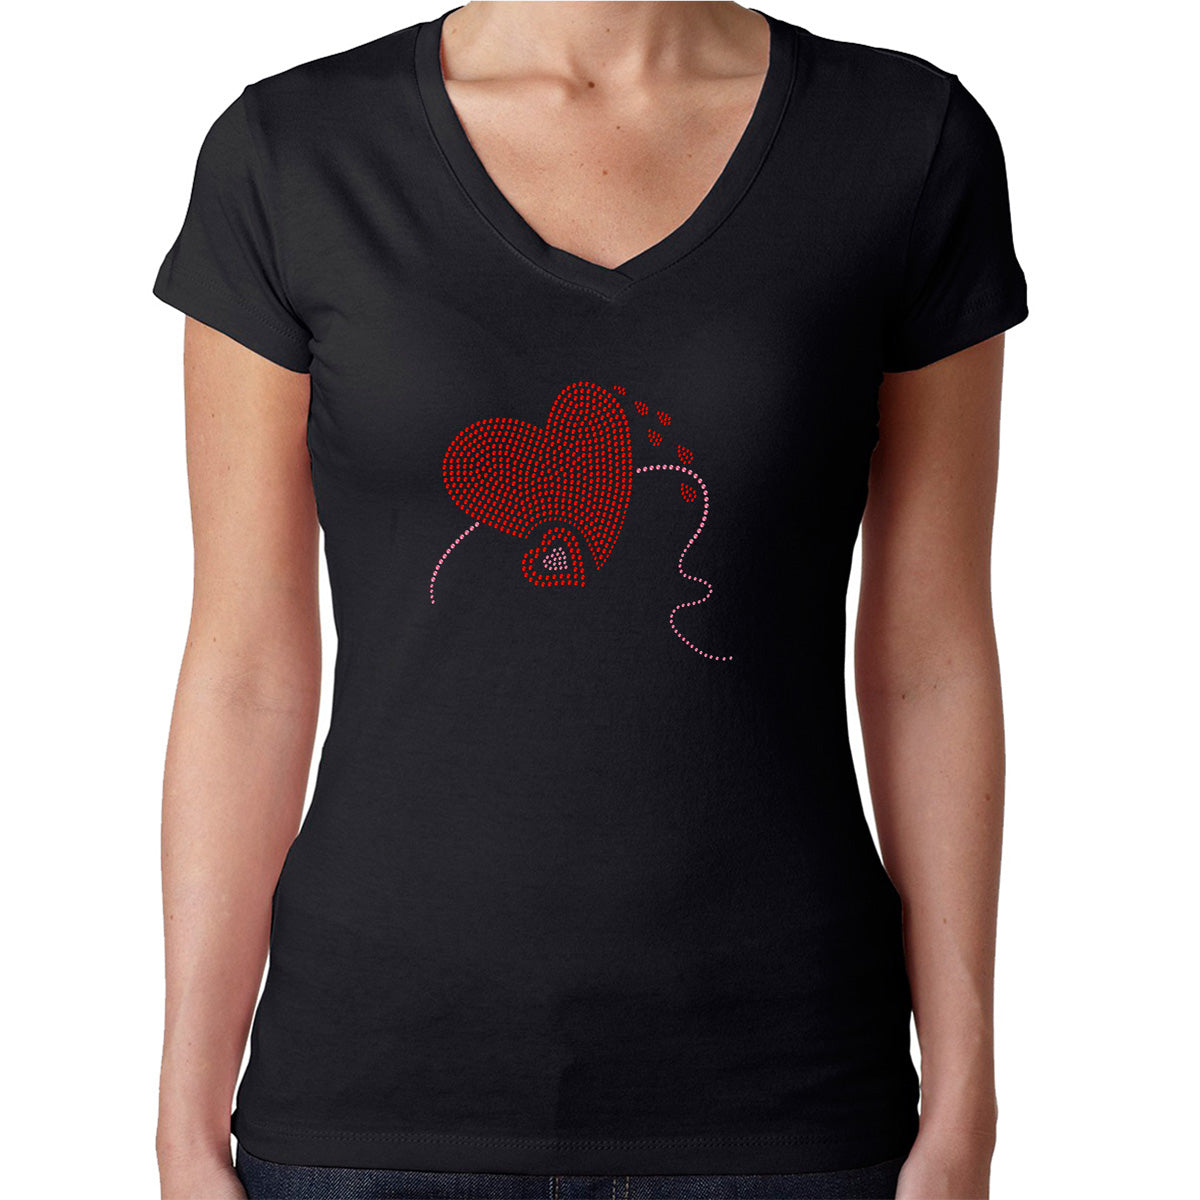 Womens T-Shirt Rhinestone Bling Black Fitted Tee Valentines Day Love Hearts